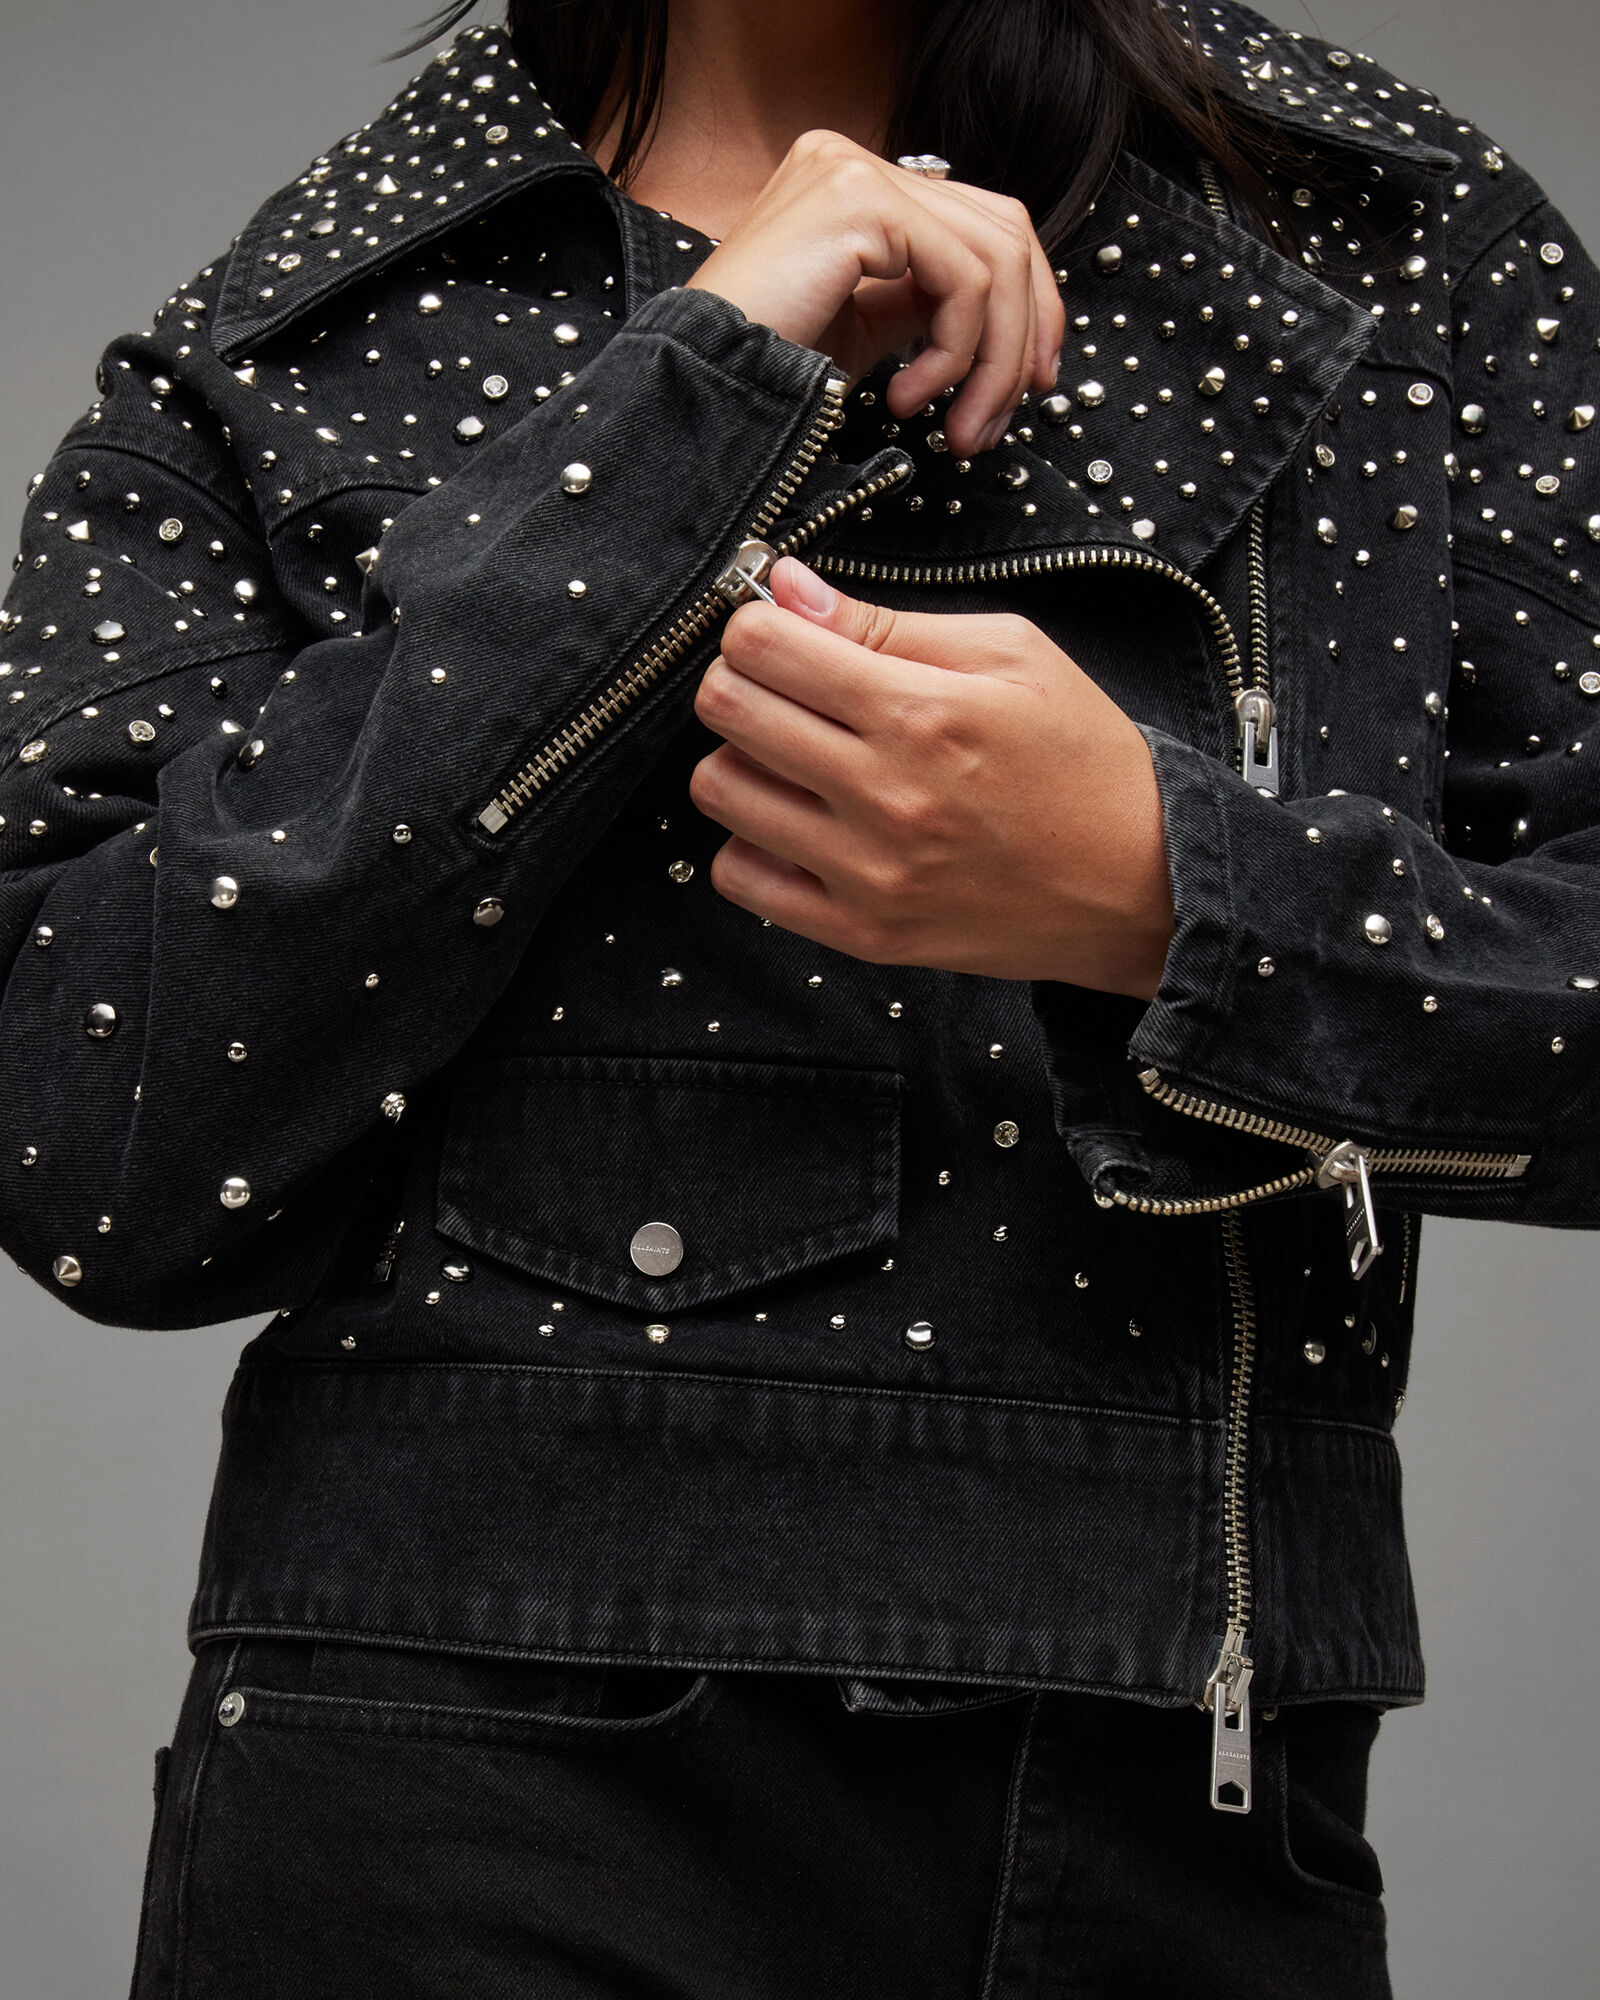 Studded Jean Jackets With Contrast Stitch | boohooMAN USA